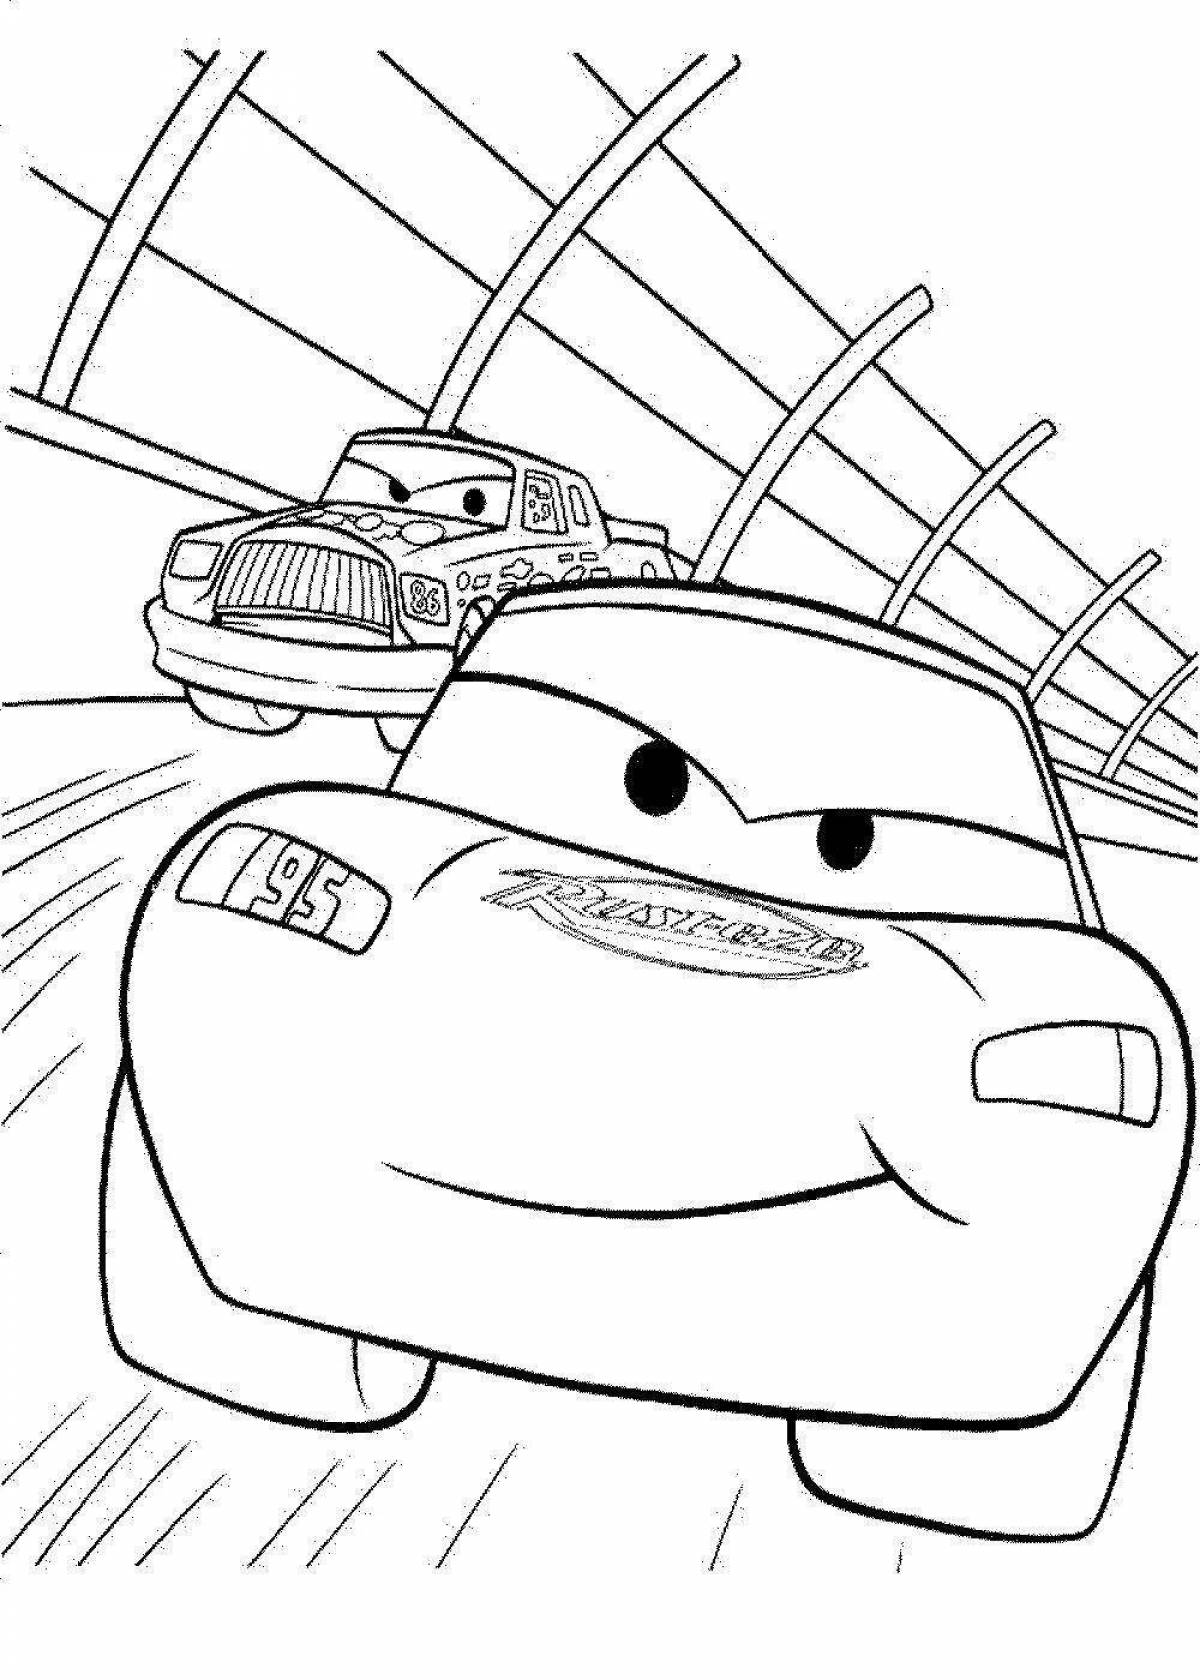 Lightning mcqueen's car coloring page